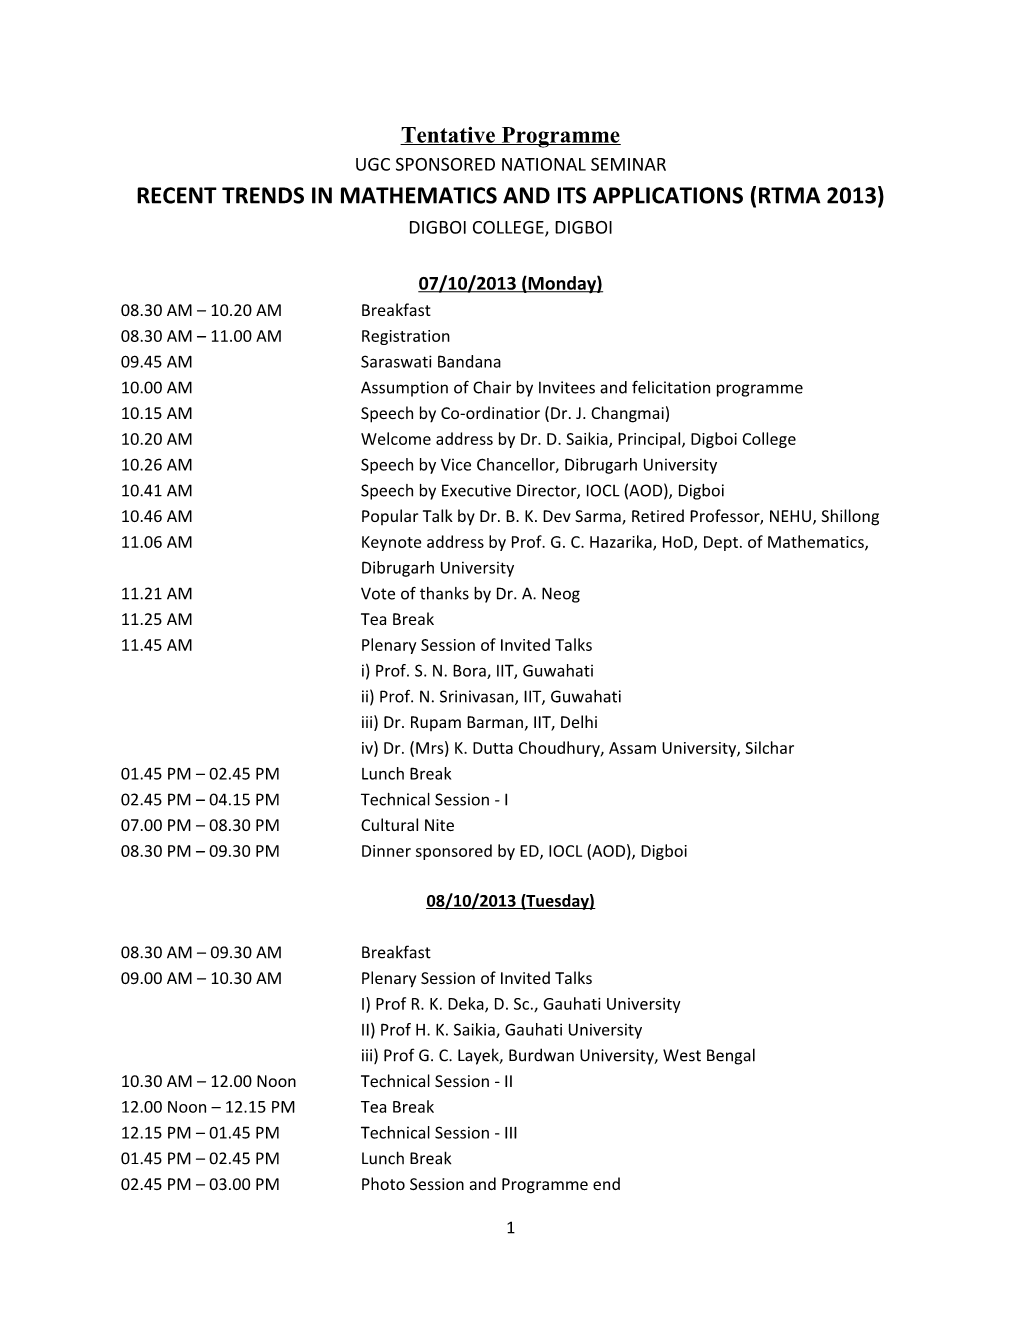 Recent Trends in Mathematics and Its Applications (Rtma 2013)